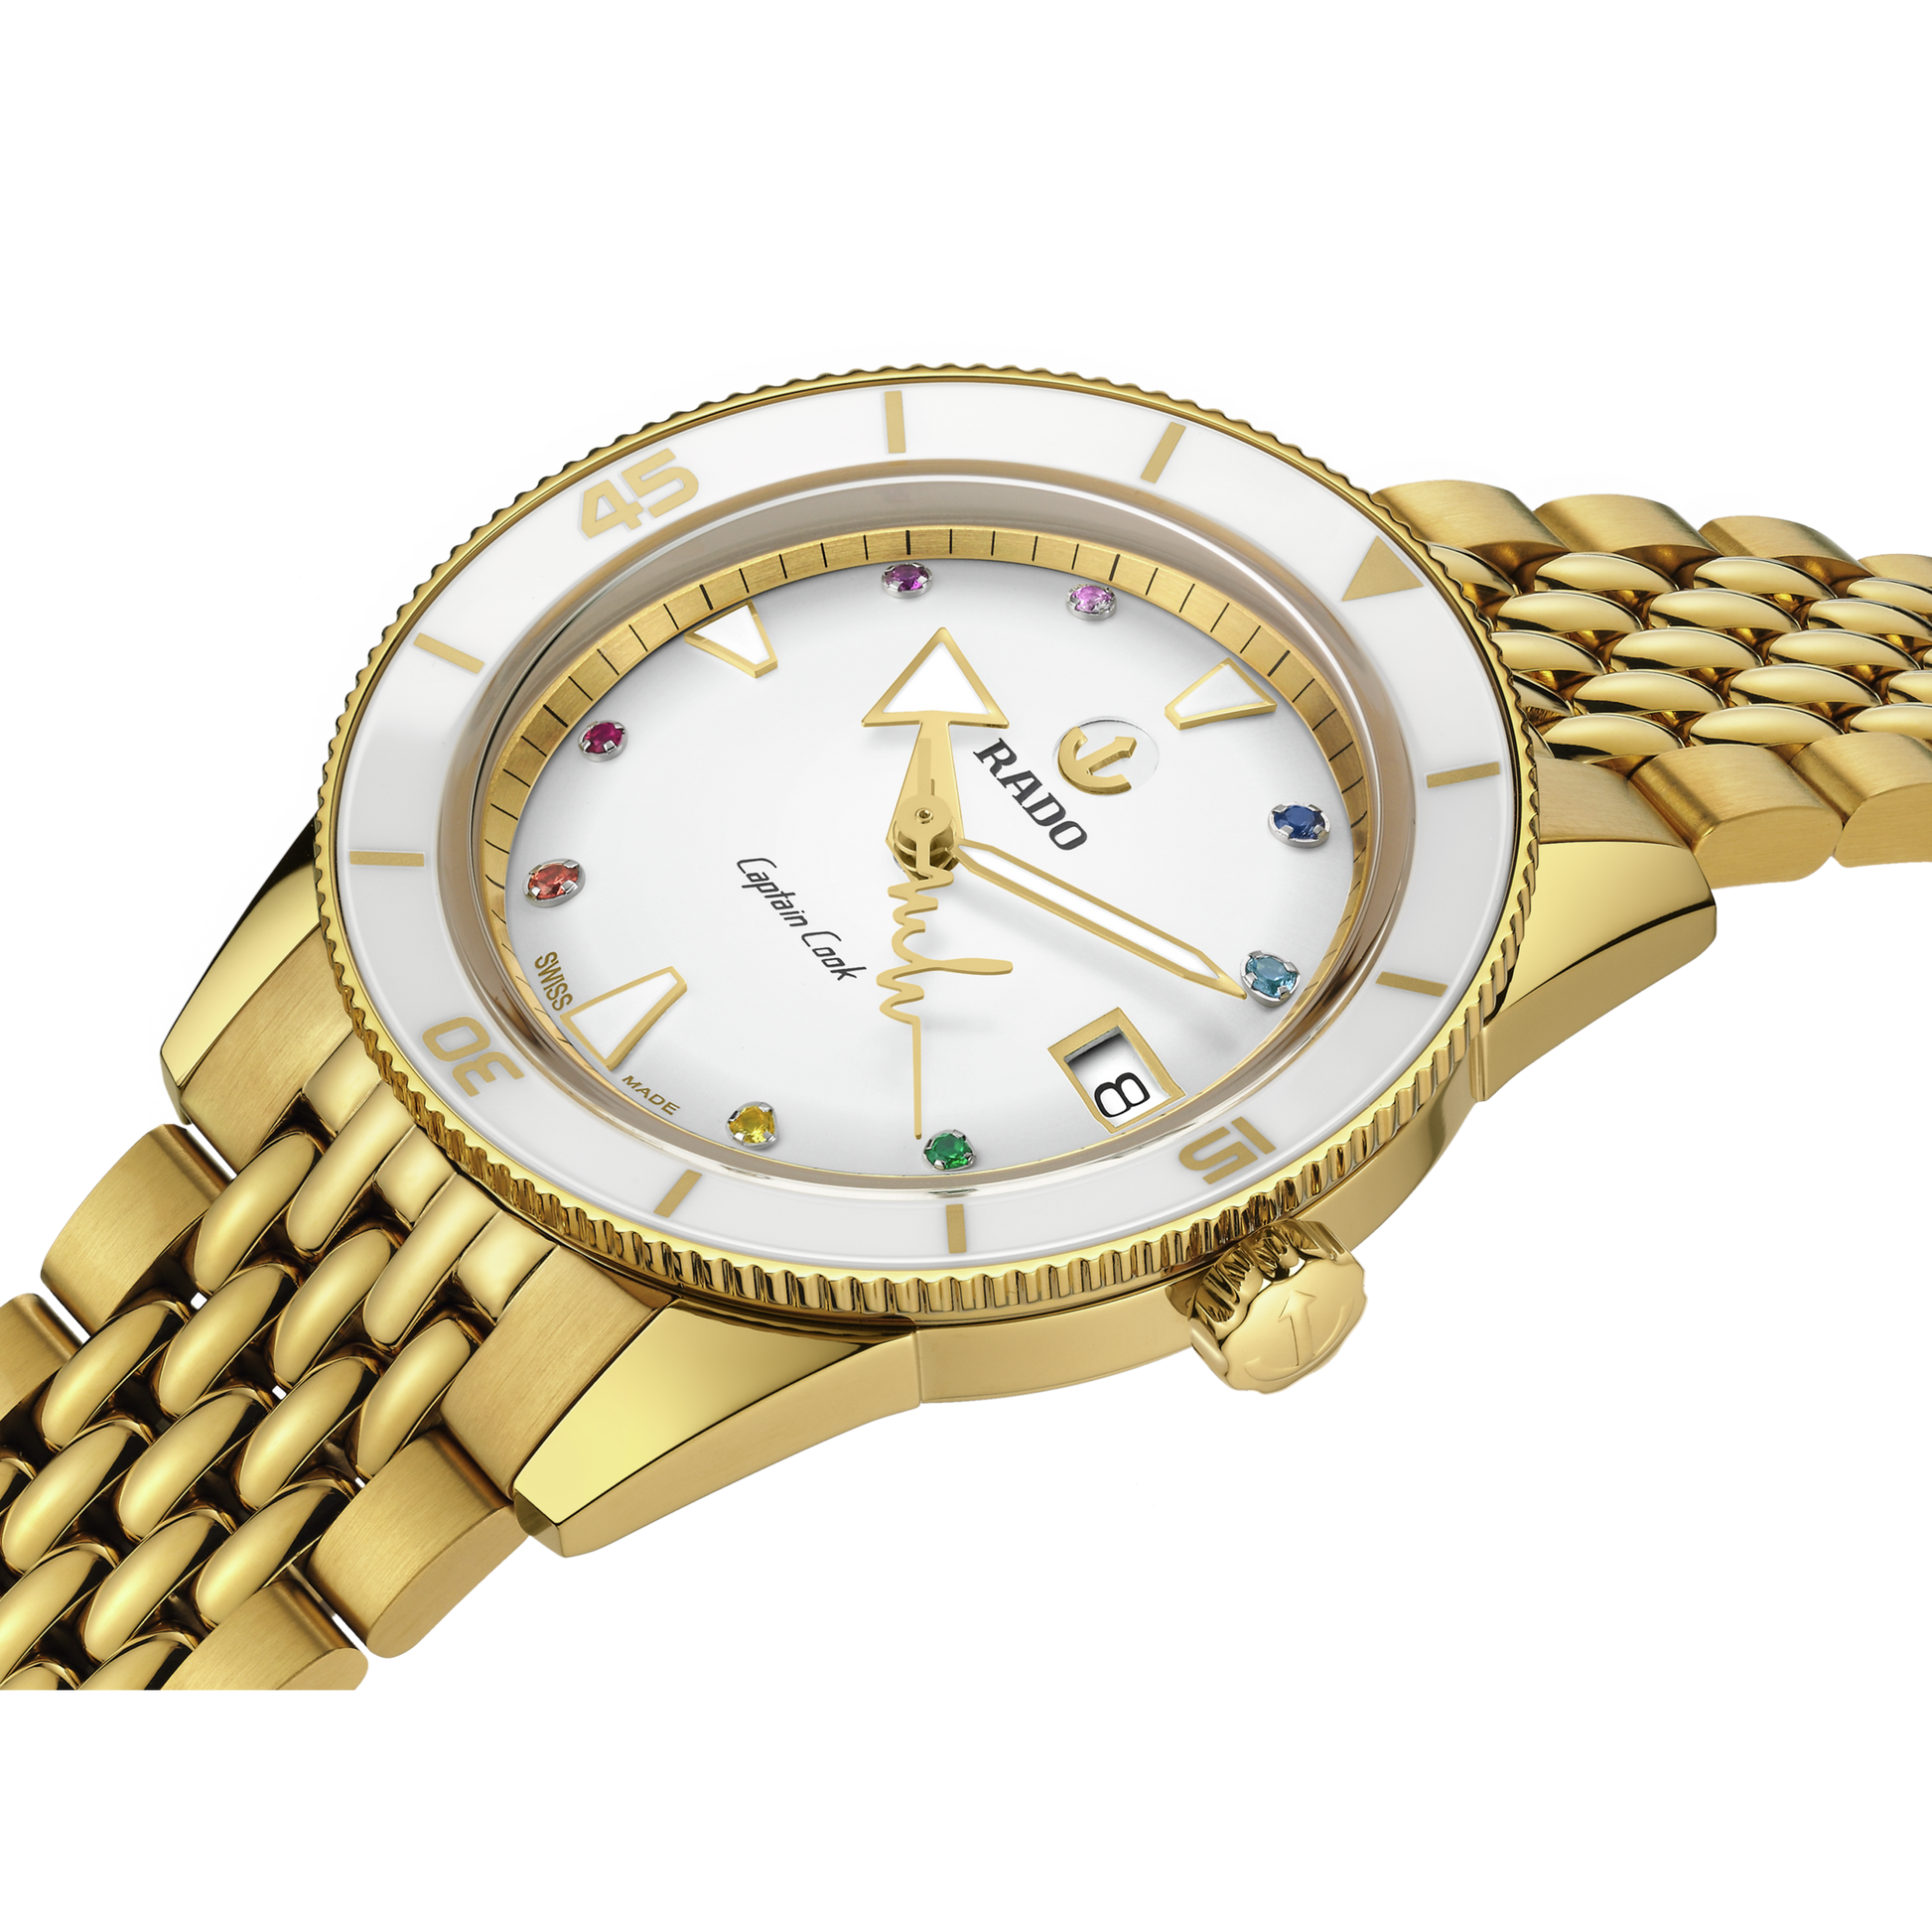 Captain Cook X Marina Hoermanseder Heartbeat Automatic Gold Stainless Steel